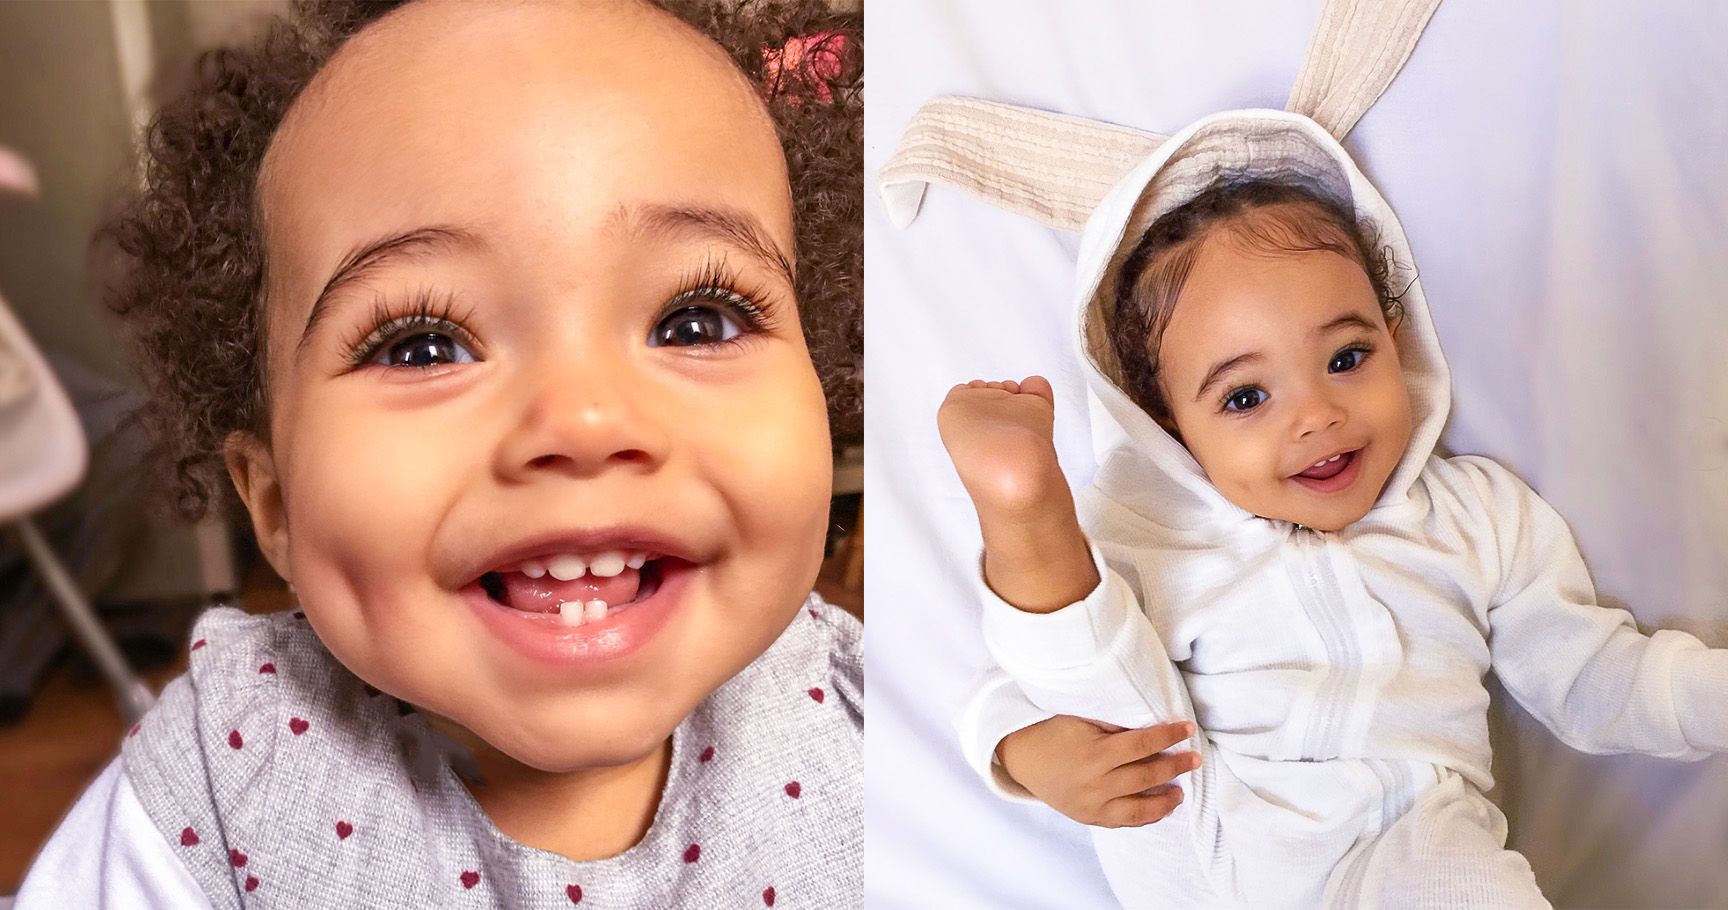 2. "10 Adorable Mixed Babies with Blonde Hair" - Instagram Inspiration - wide 8